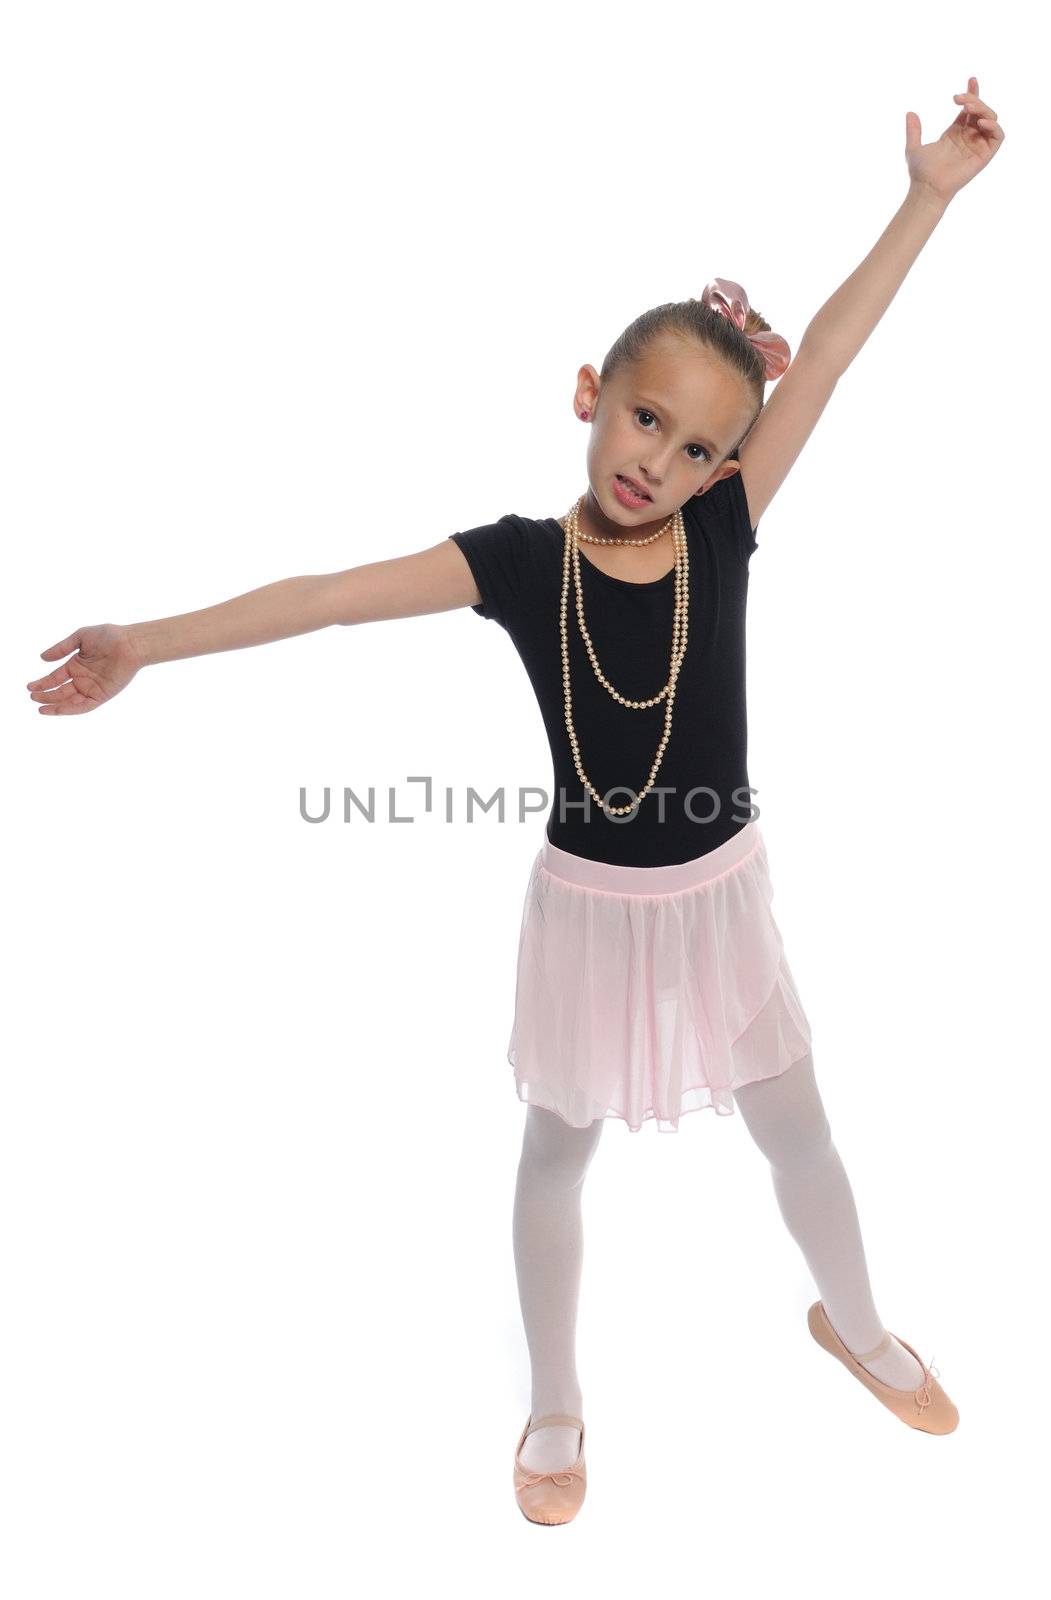 cute young girl posing in a dance costume on a white background